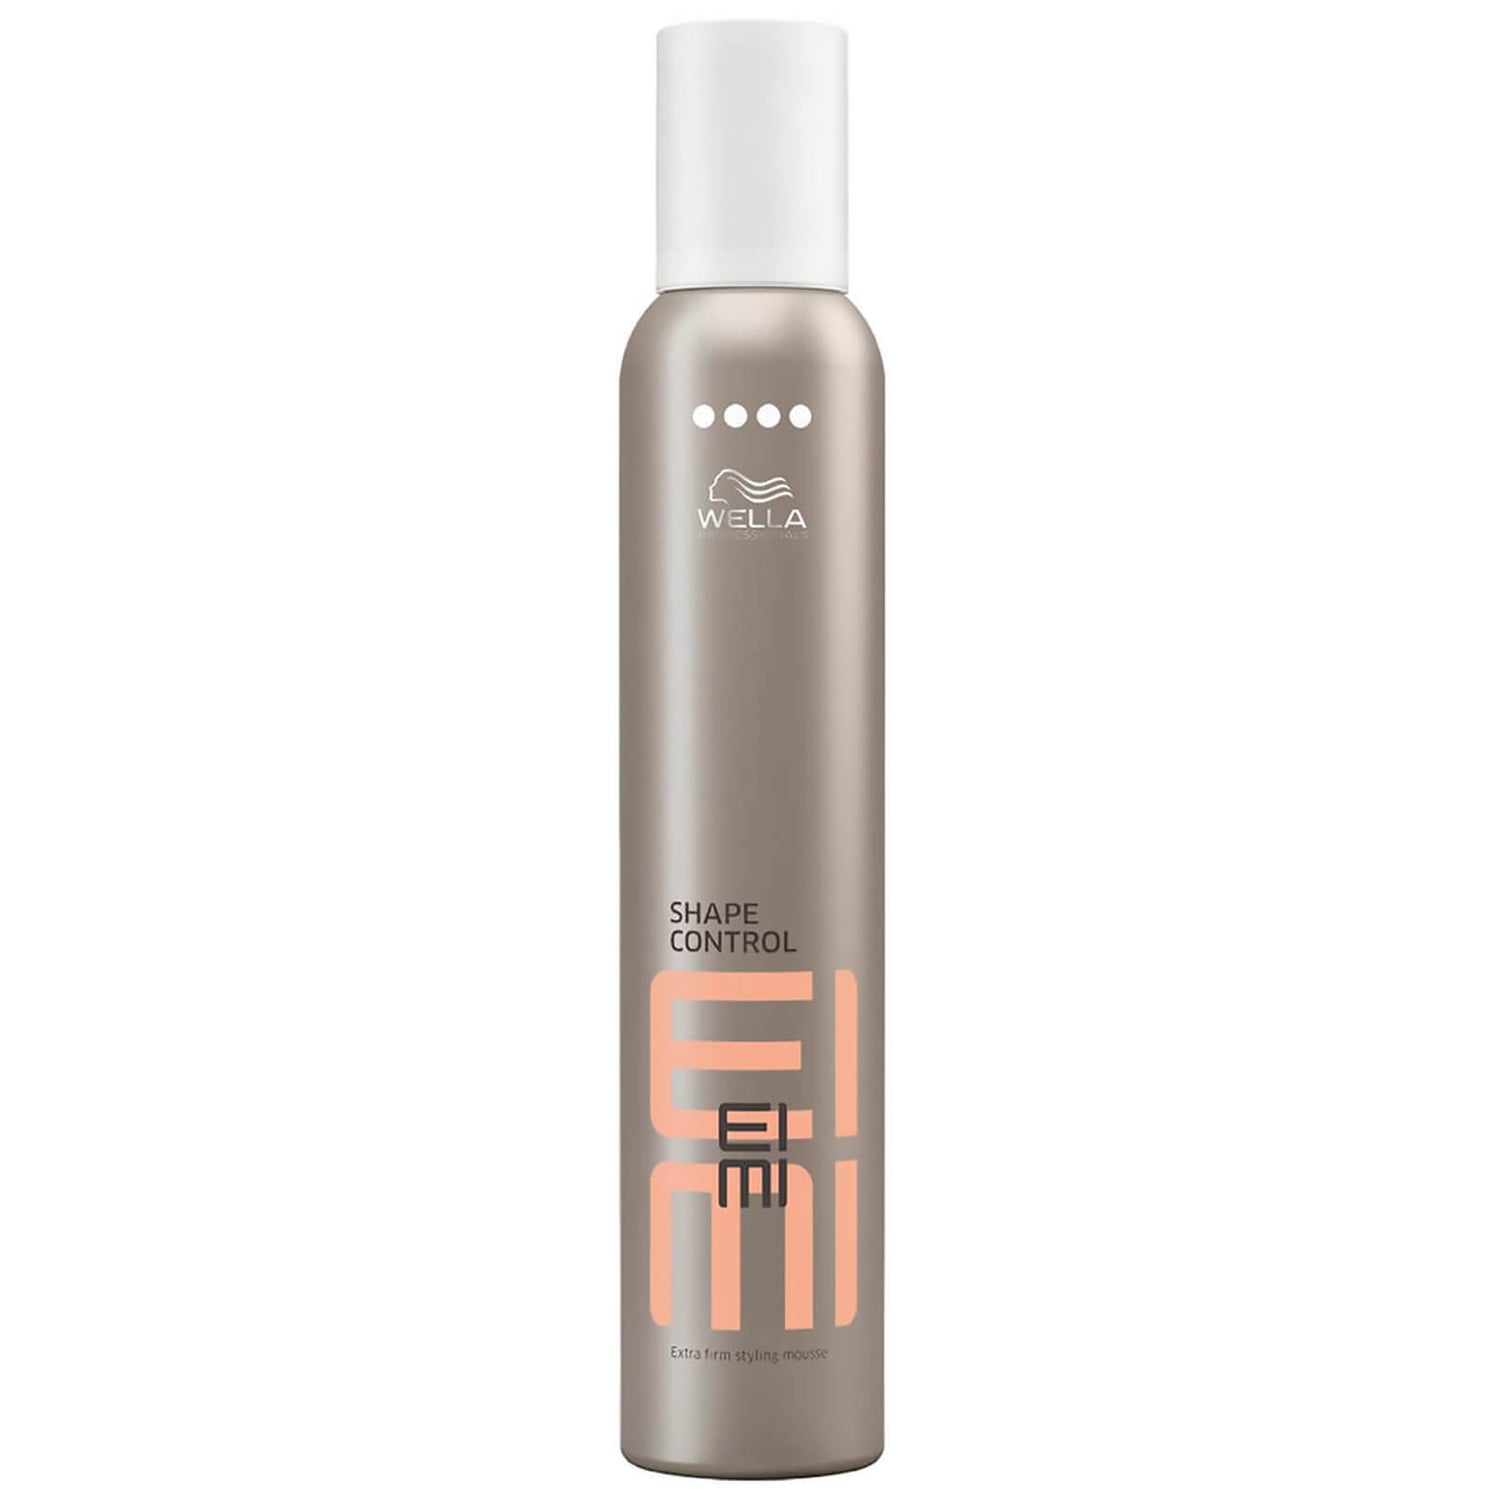 WELLA PROFESSIONALS WET SHAPE CONTROL STYLING MOUSSE (500ML)